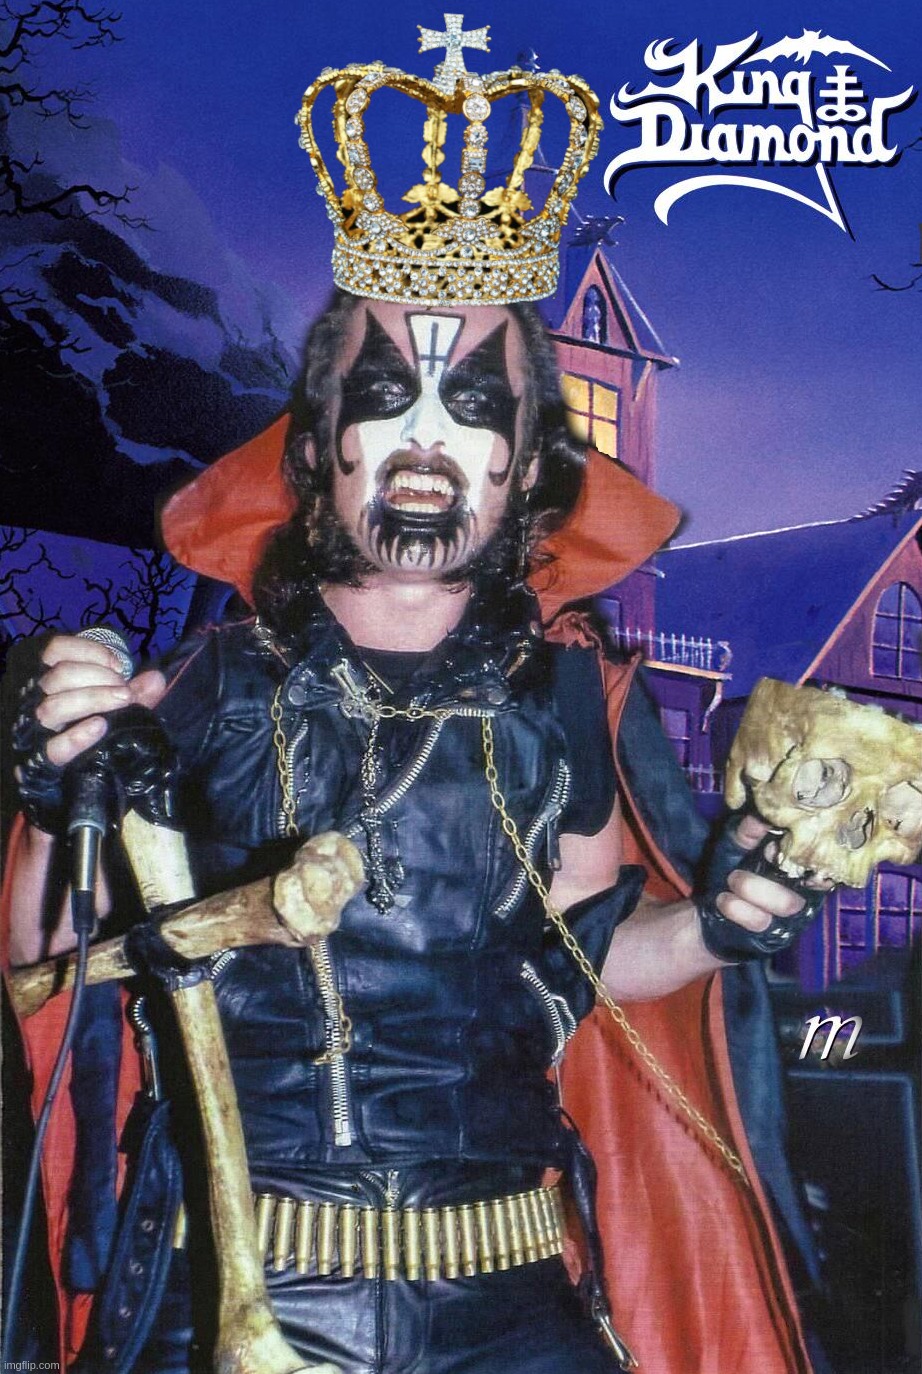 Queen of King Diamond the M | image tagged in queen,king,diamond,13,denmark,them | made w/ Imgflip meme maker